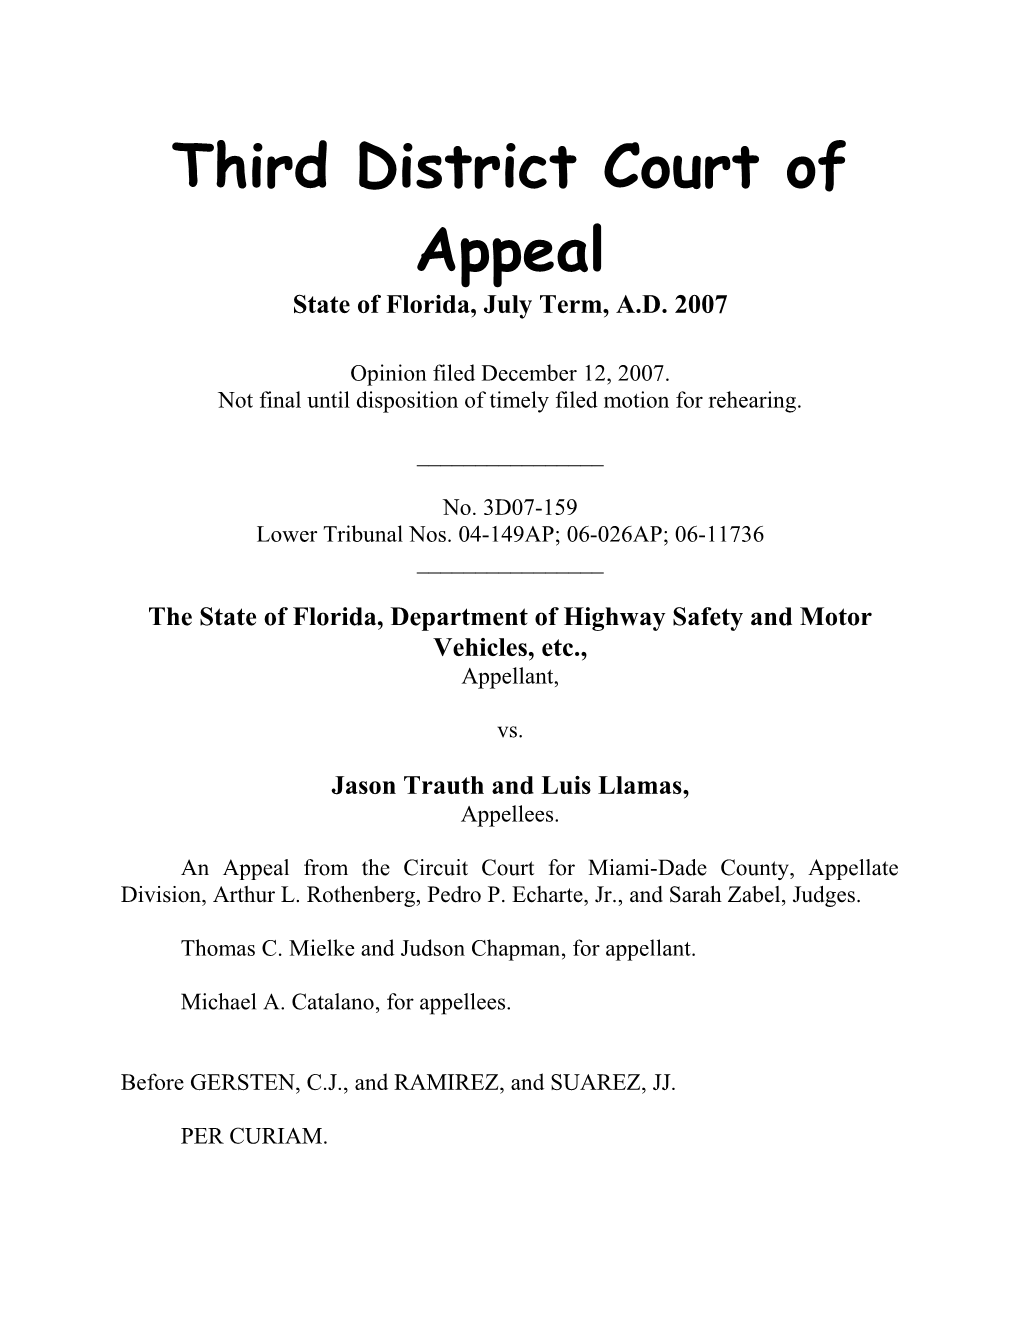 Third District Court of Appeal s1